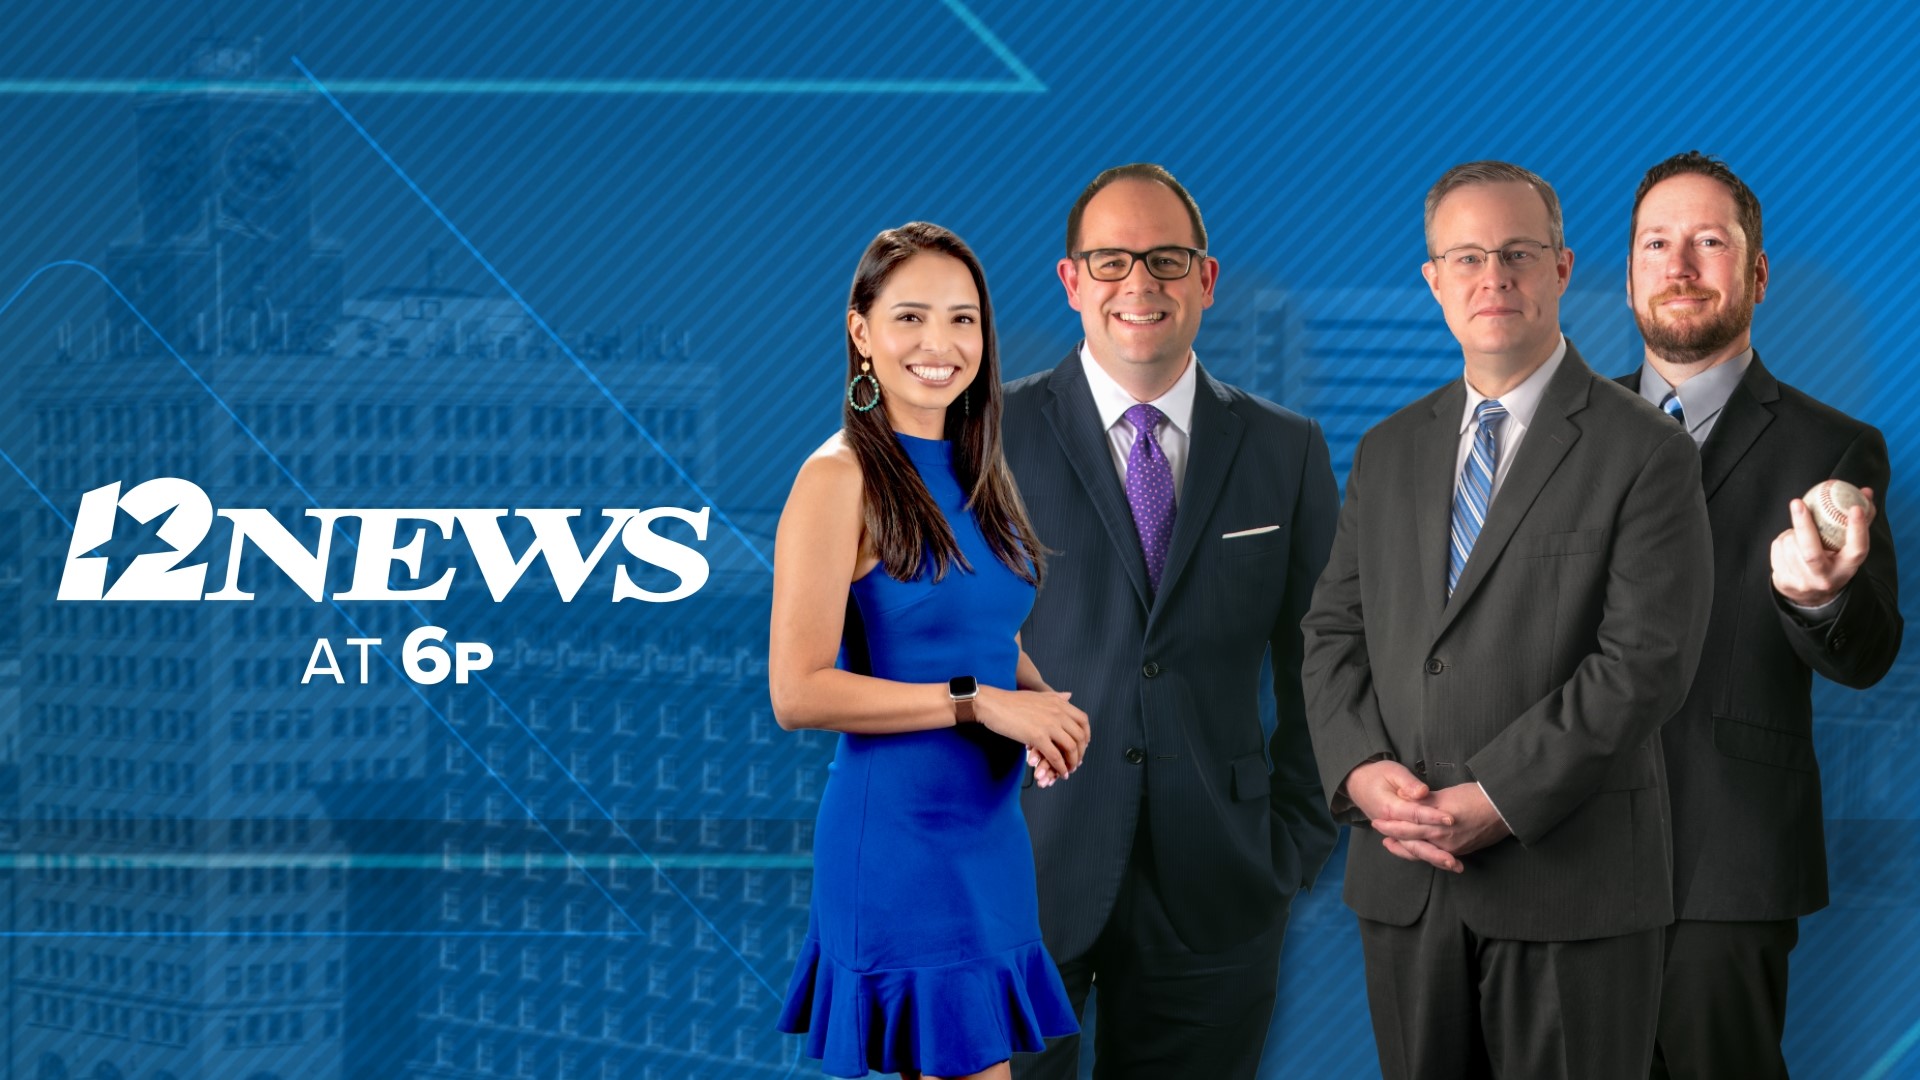 12News at 6pm - Breaking news, weather and sports Southeast Texas' top news team, Jordan Williams, Patrick Vaugh and Ashly Elam. 